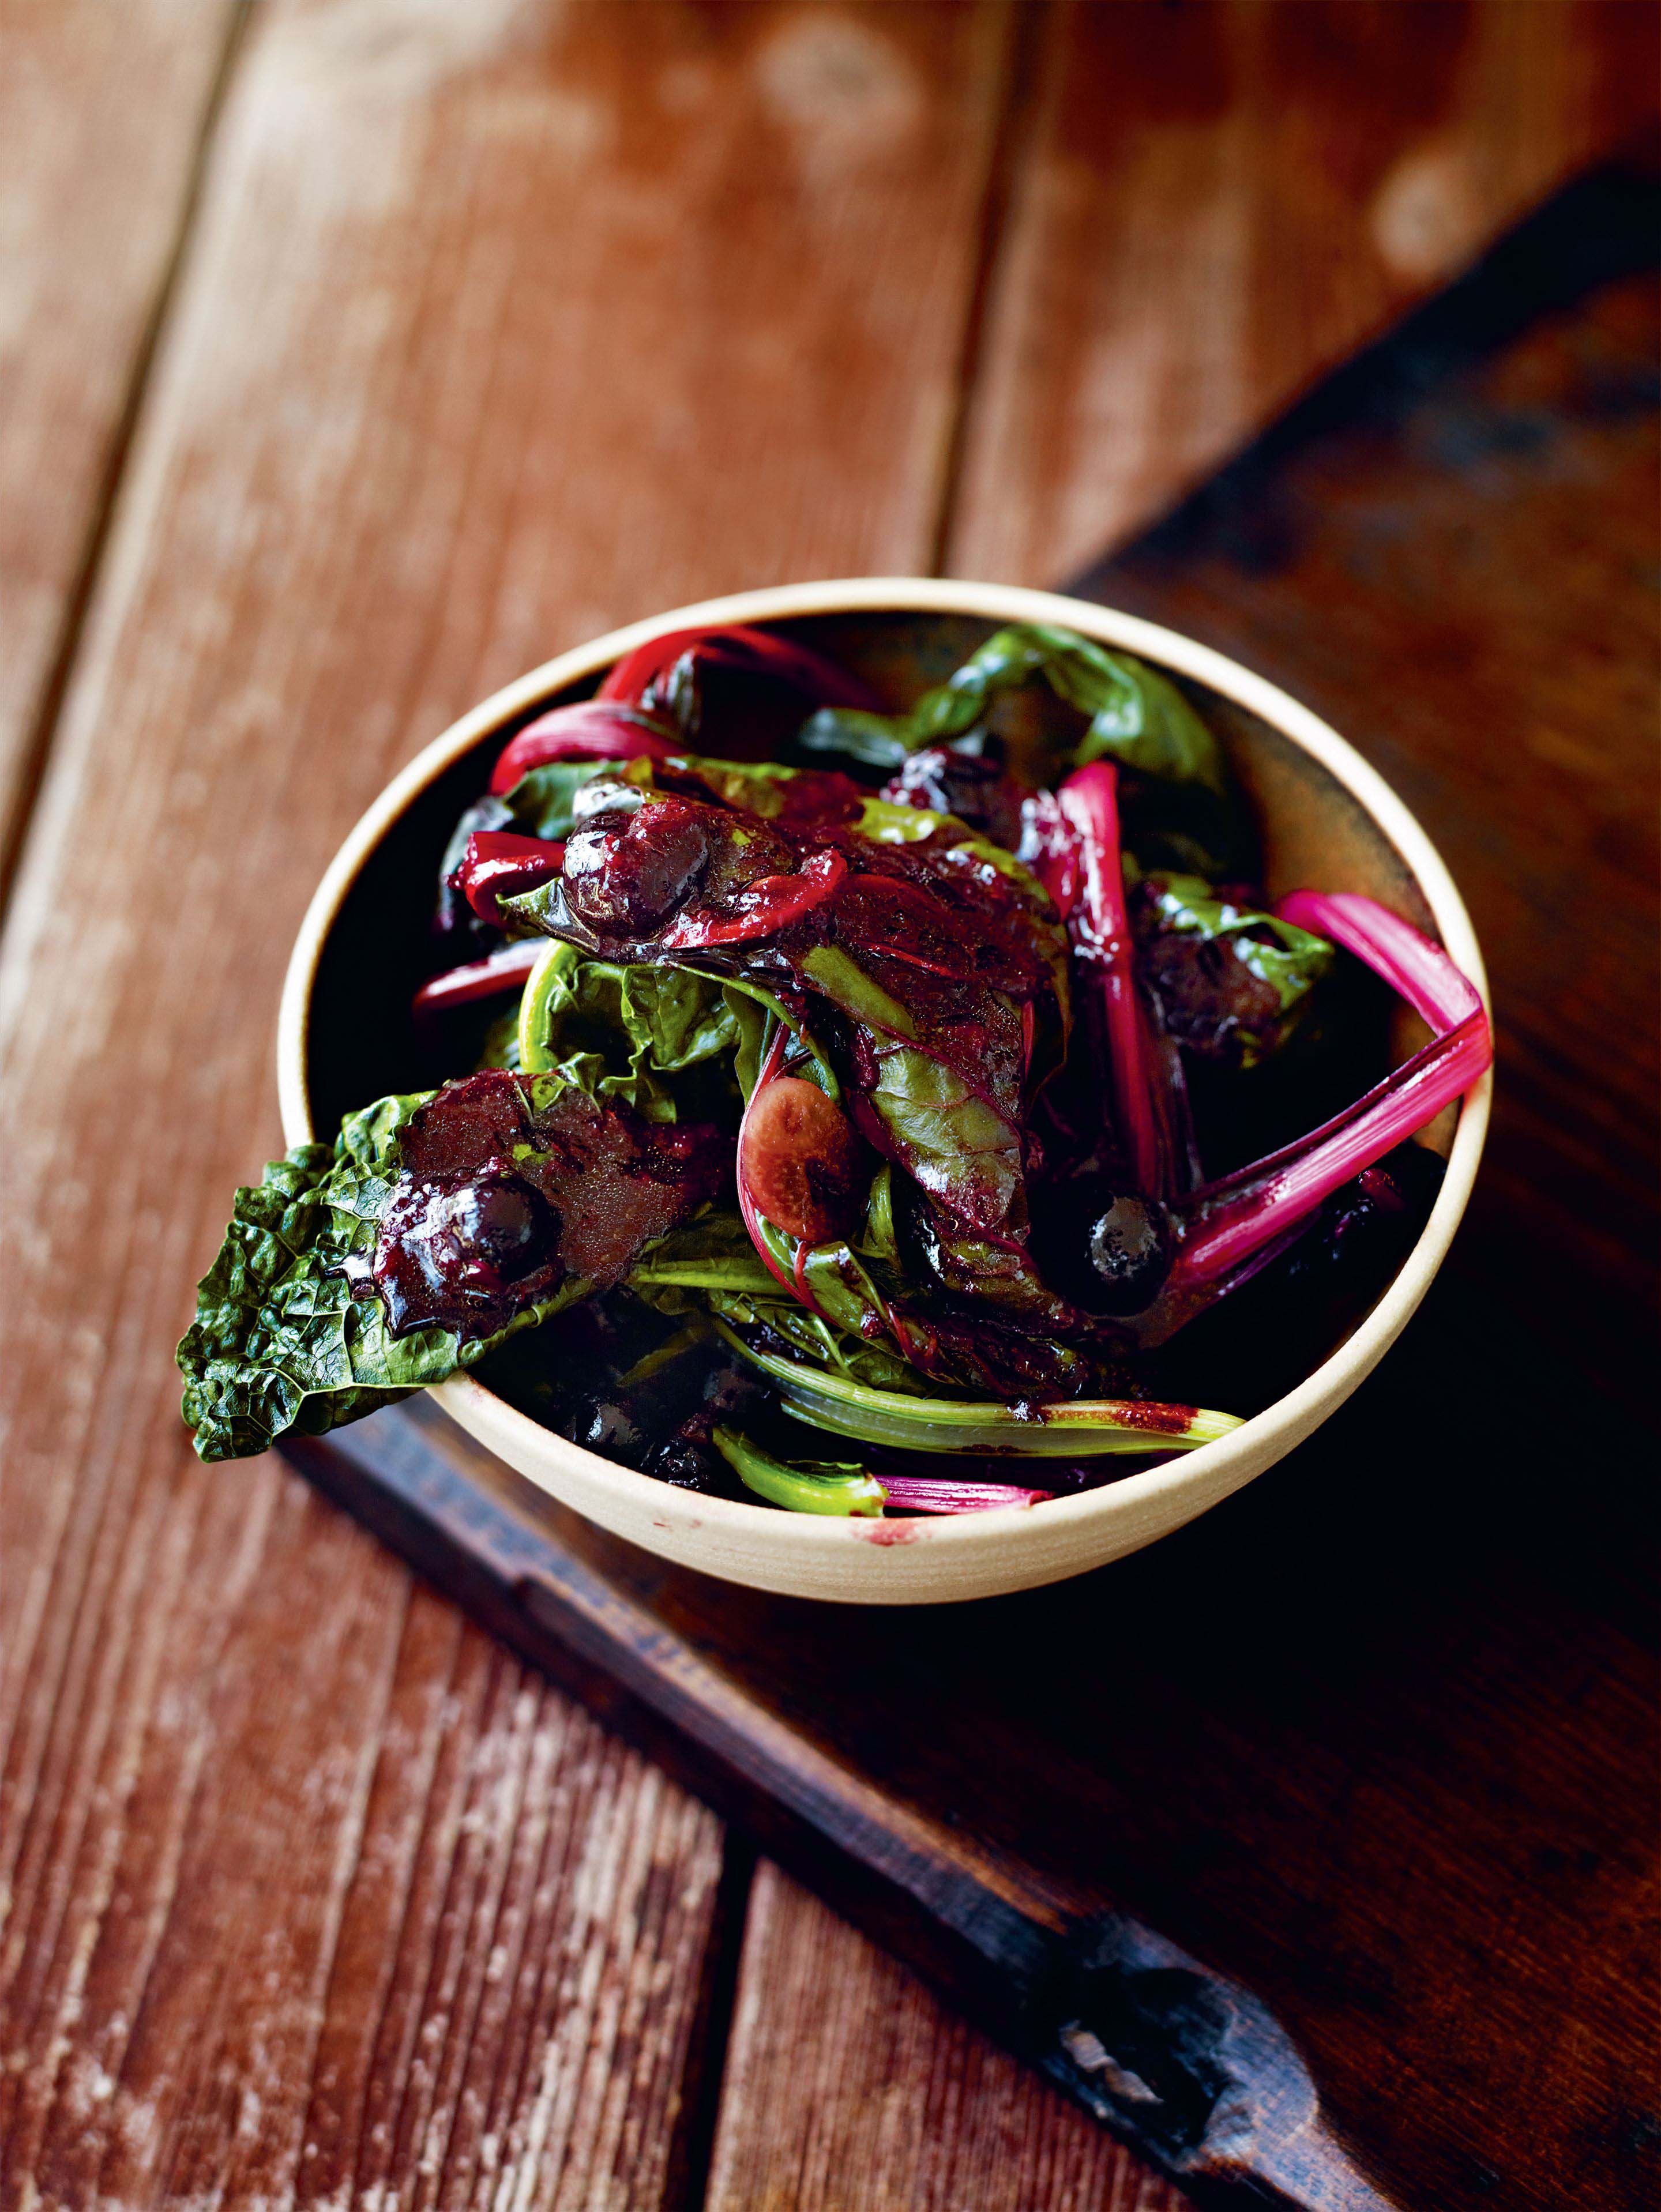 Blackcurrant greens with chilli, ginger & garlic